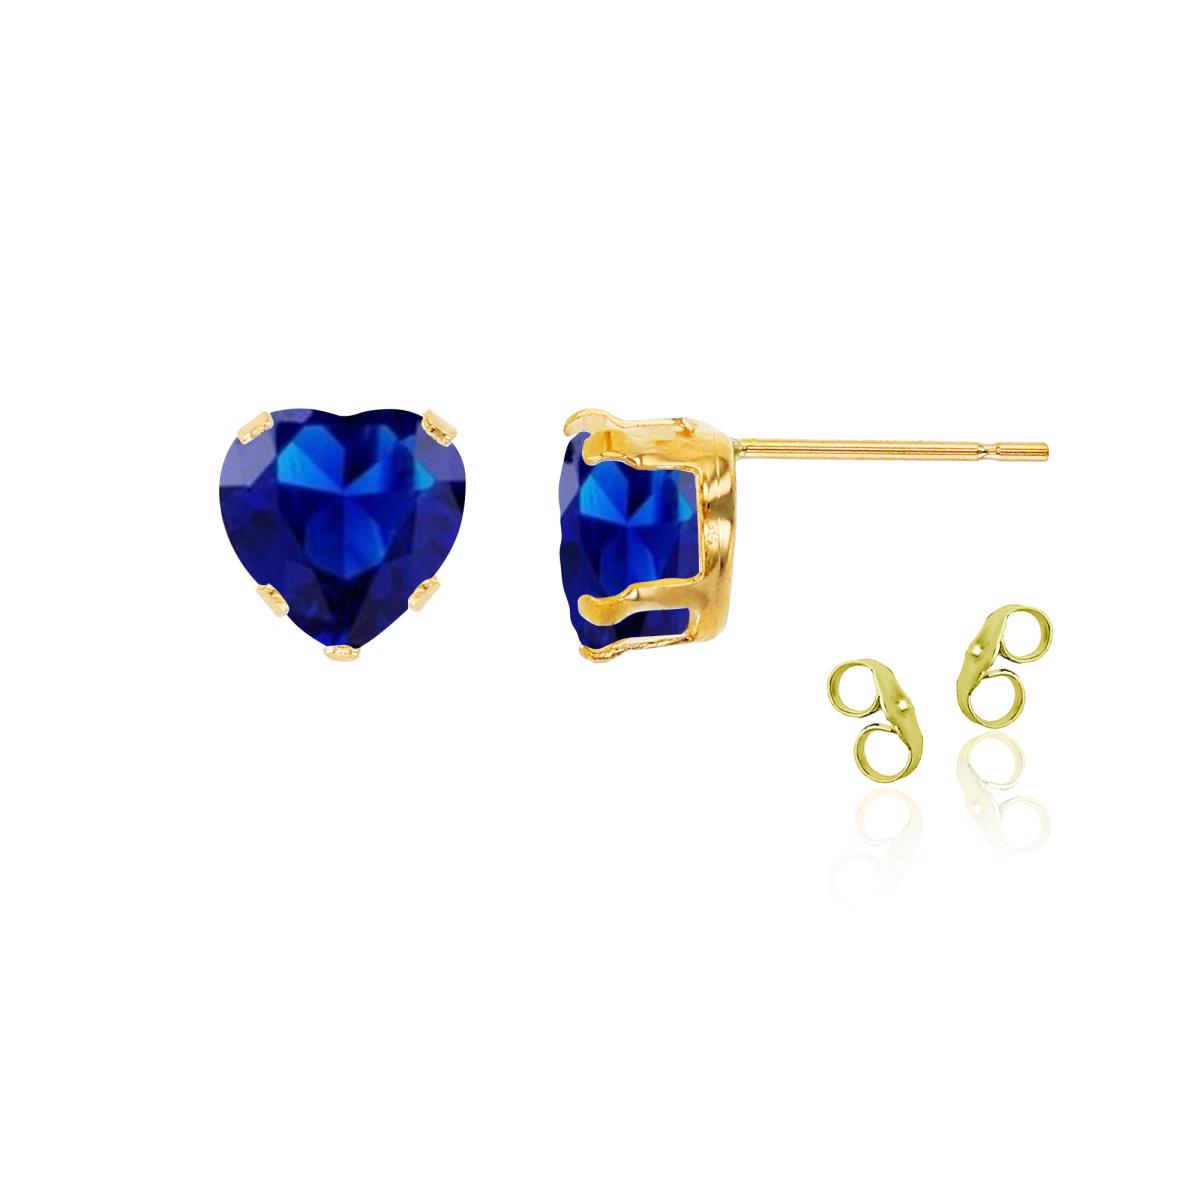 Sterling Silver Yellow 5x5mm Heart Cr Blue Sapphire Stud Earring with Clutch